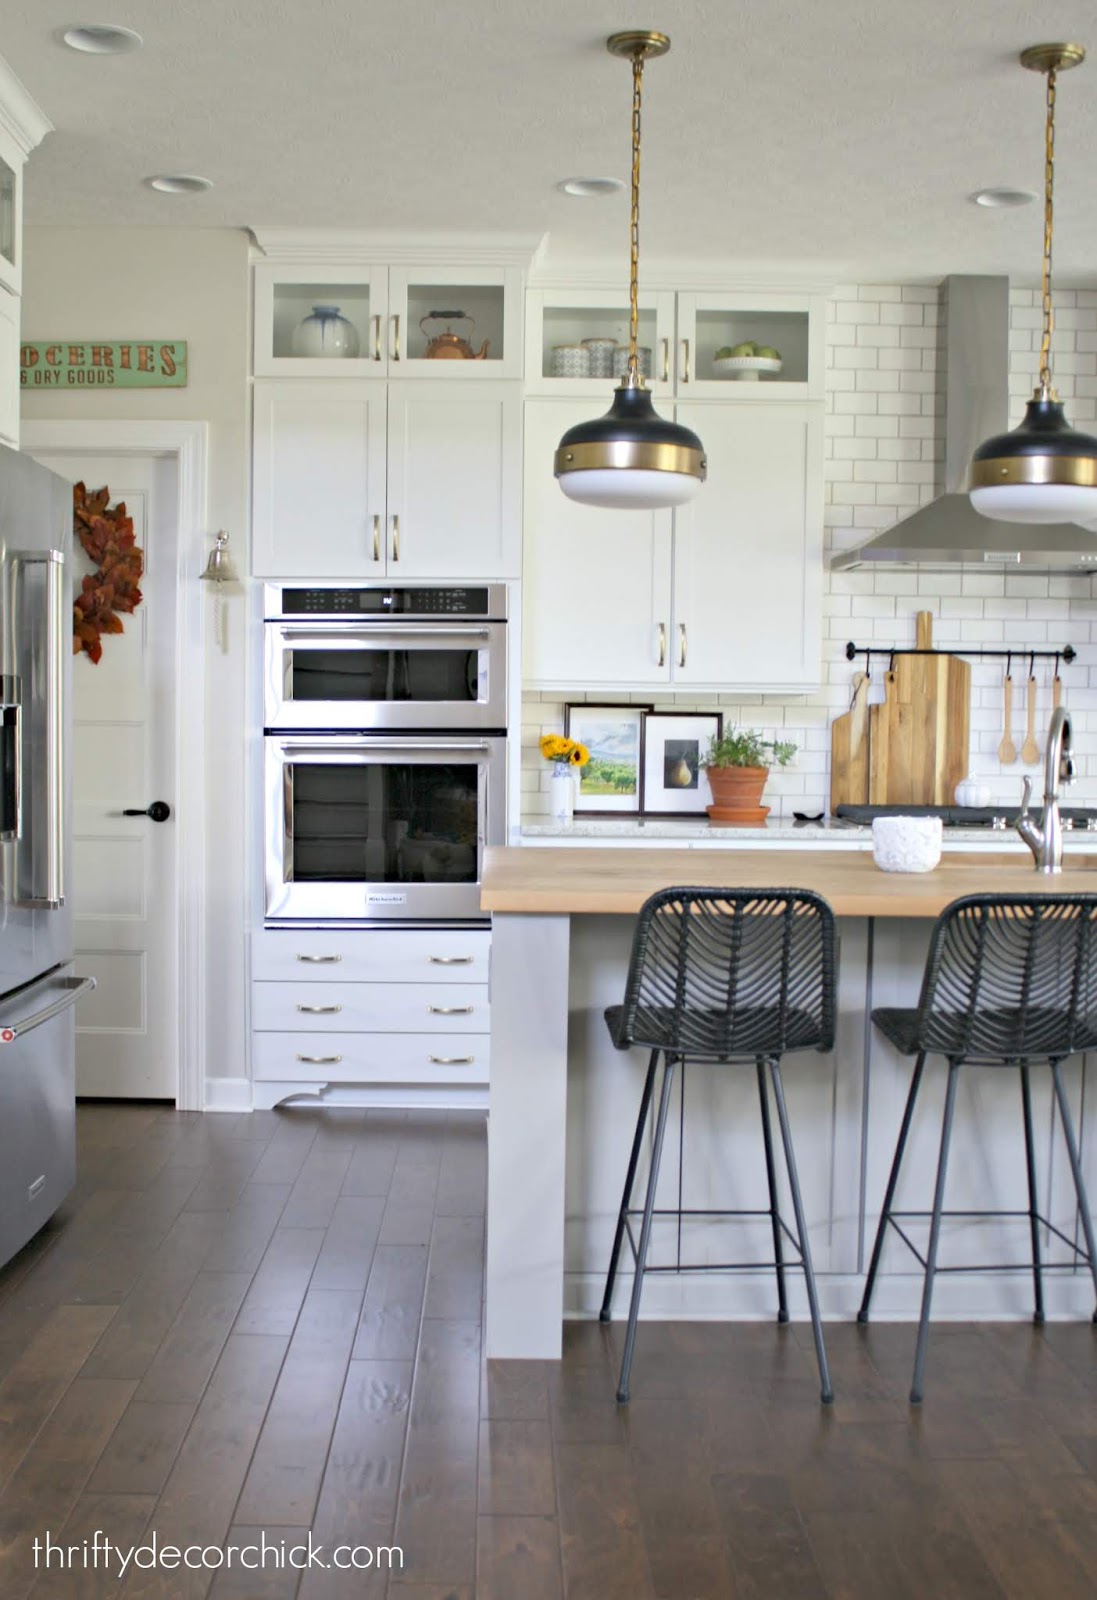 How to add feet to kitchen cabinets 